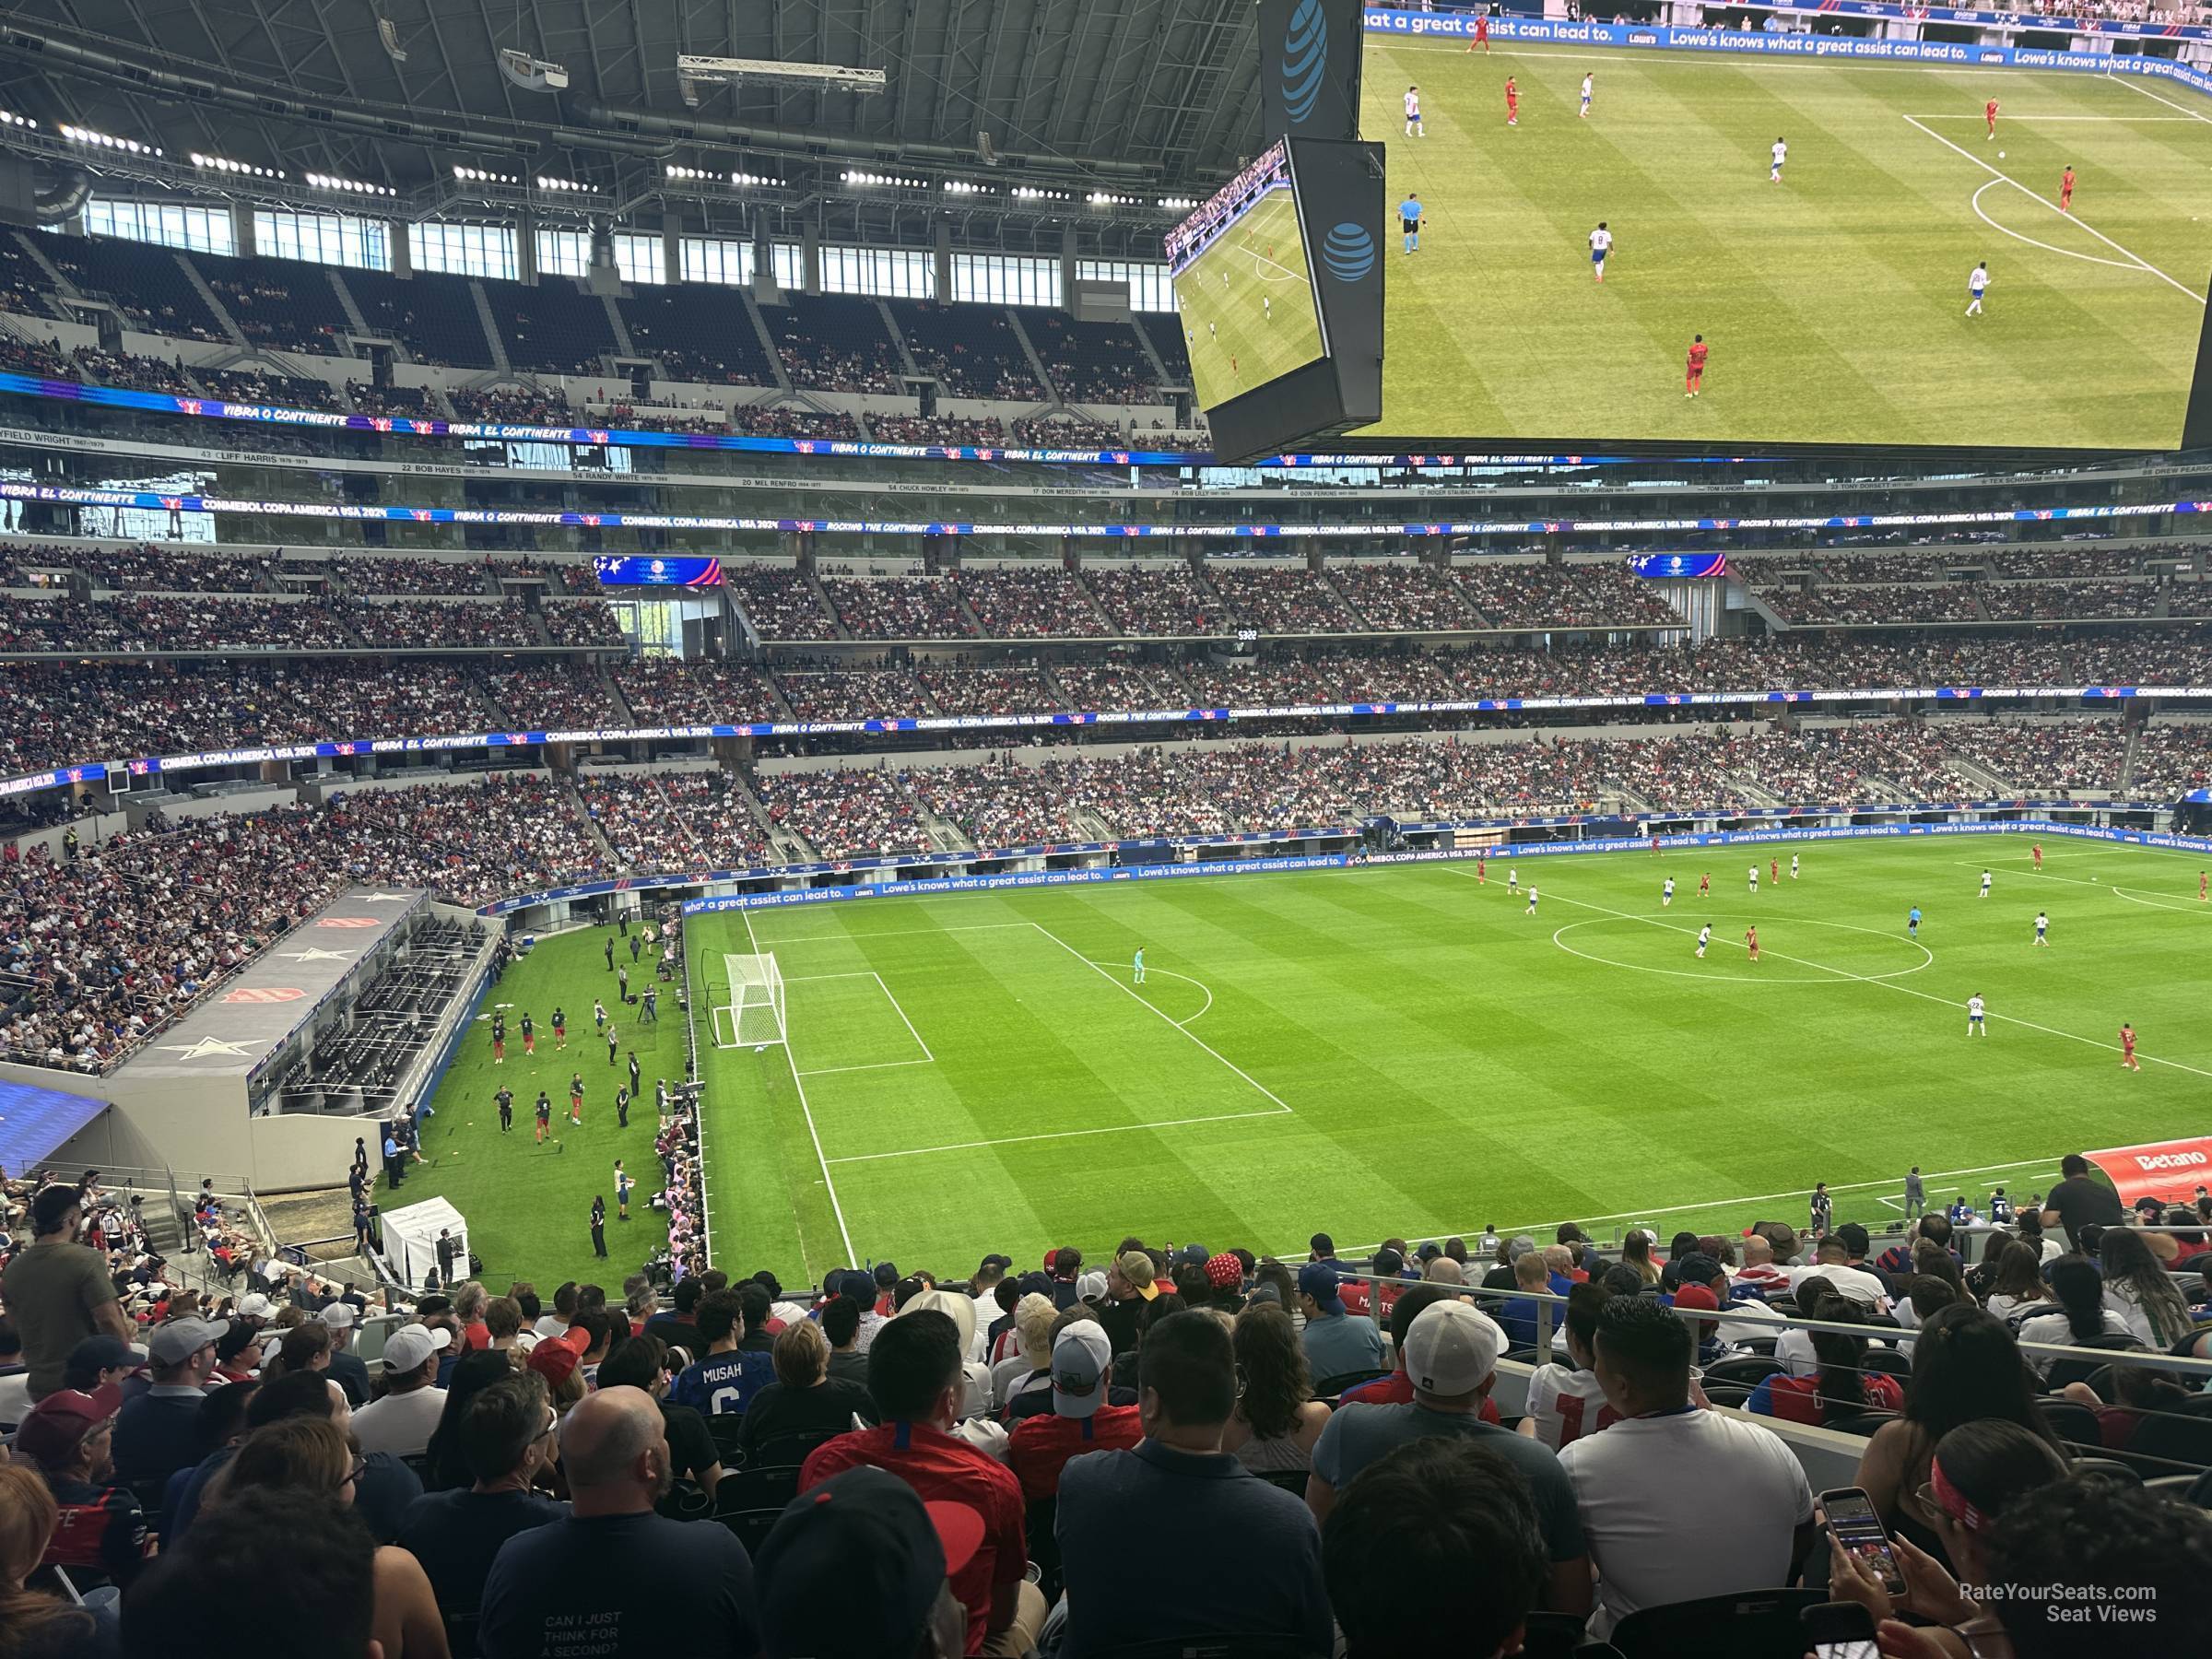 section 240, row 14 seat view  for soccer - at&t stadium (cowboys stadium)